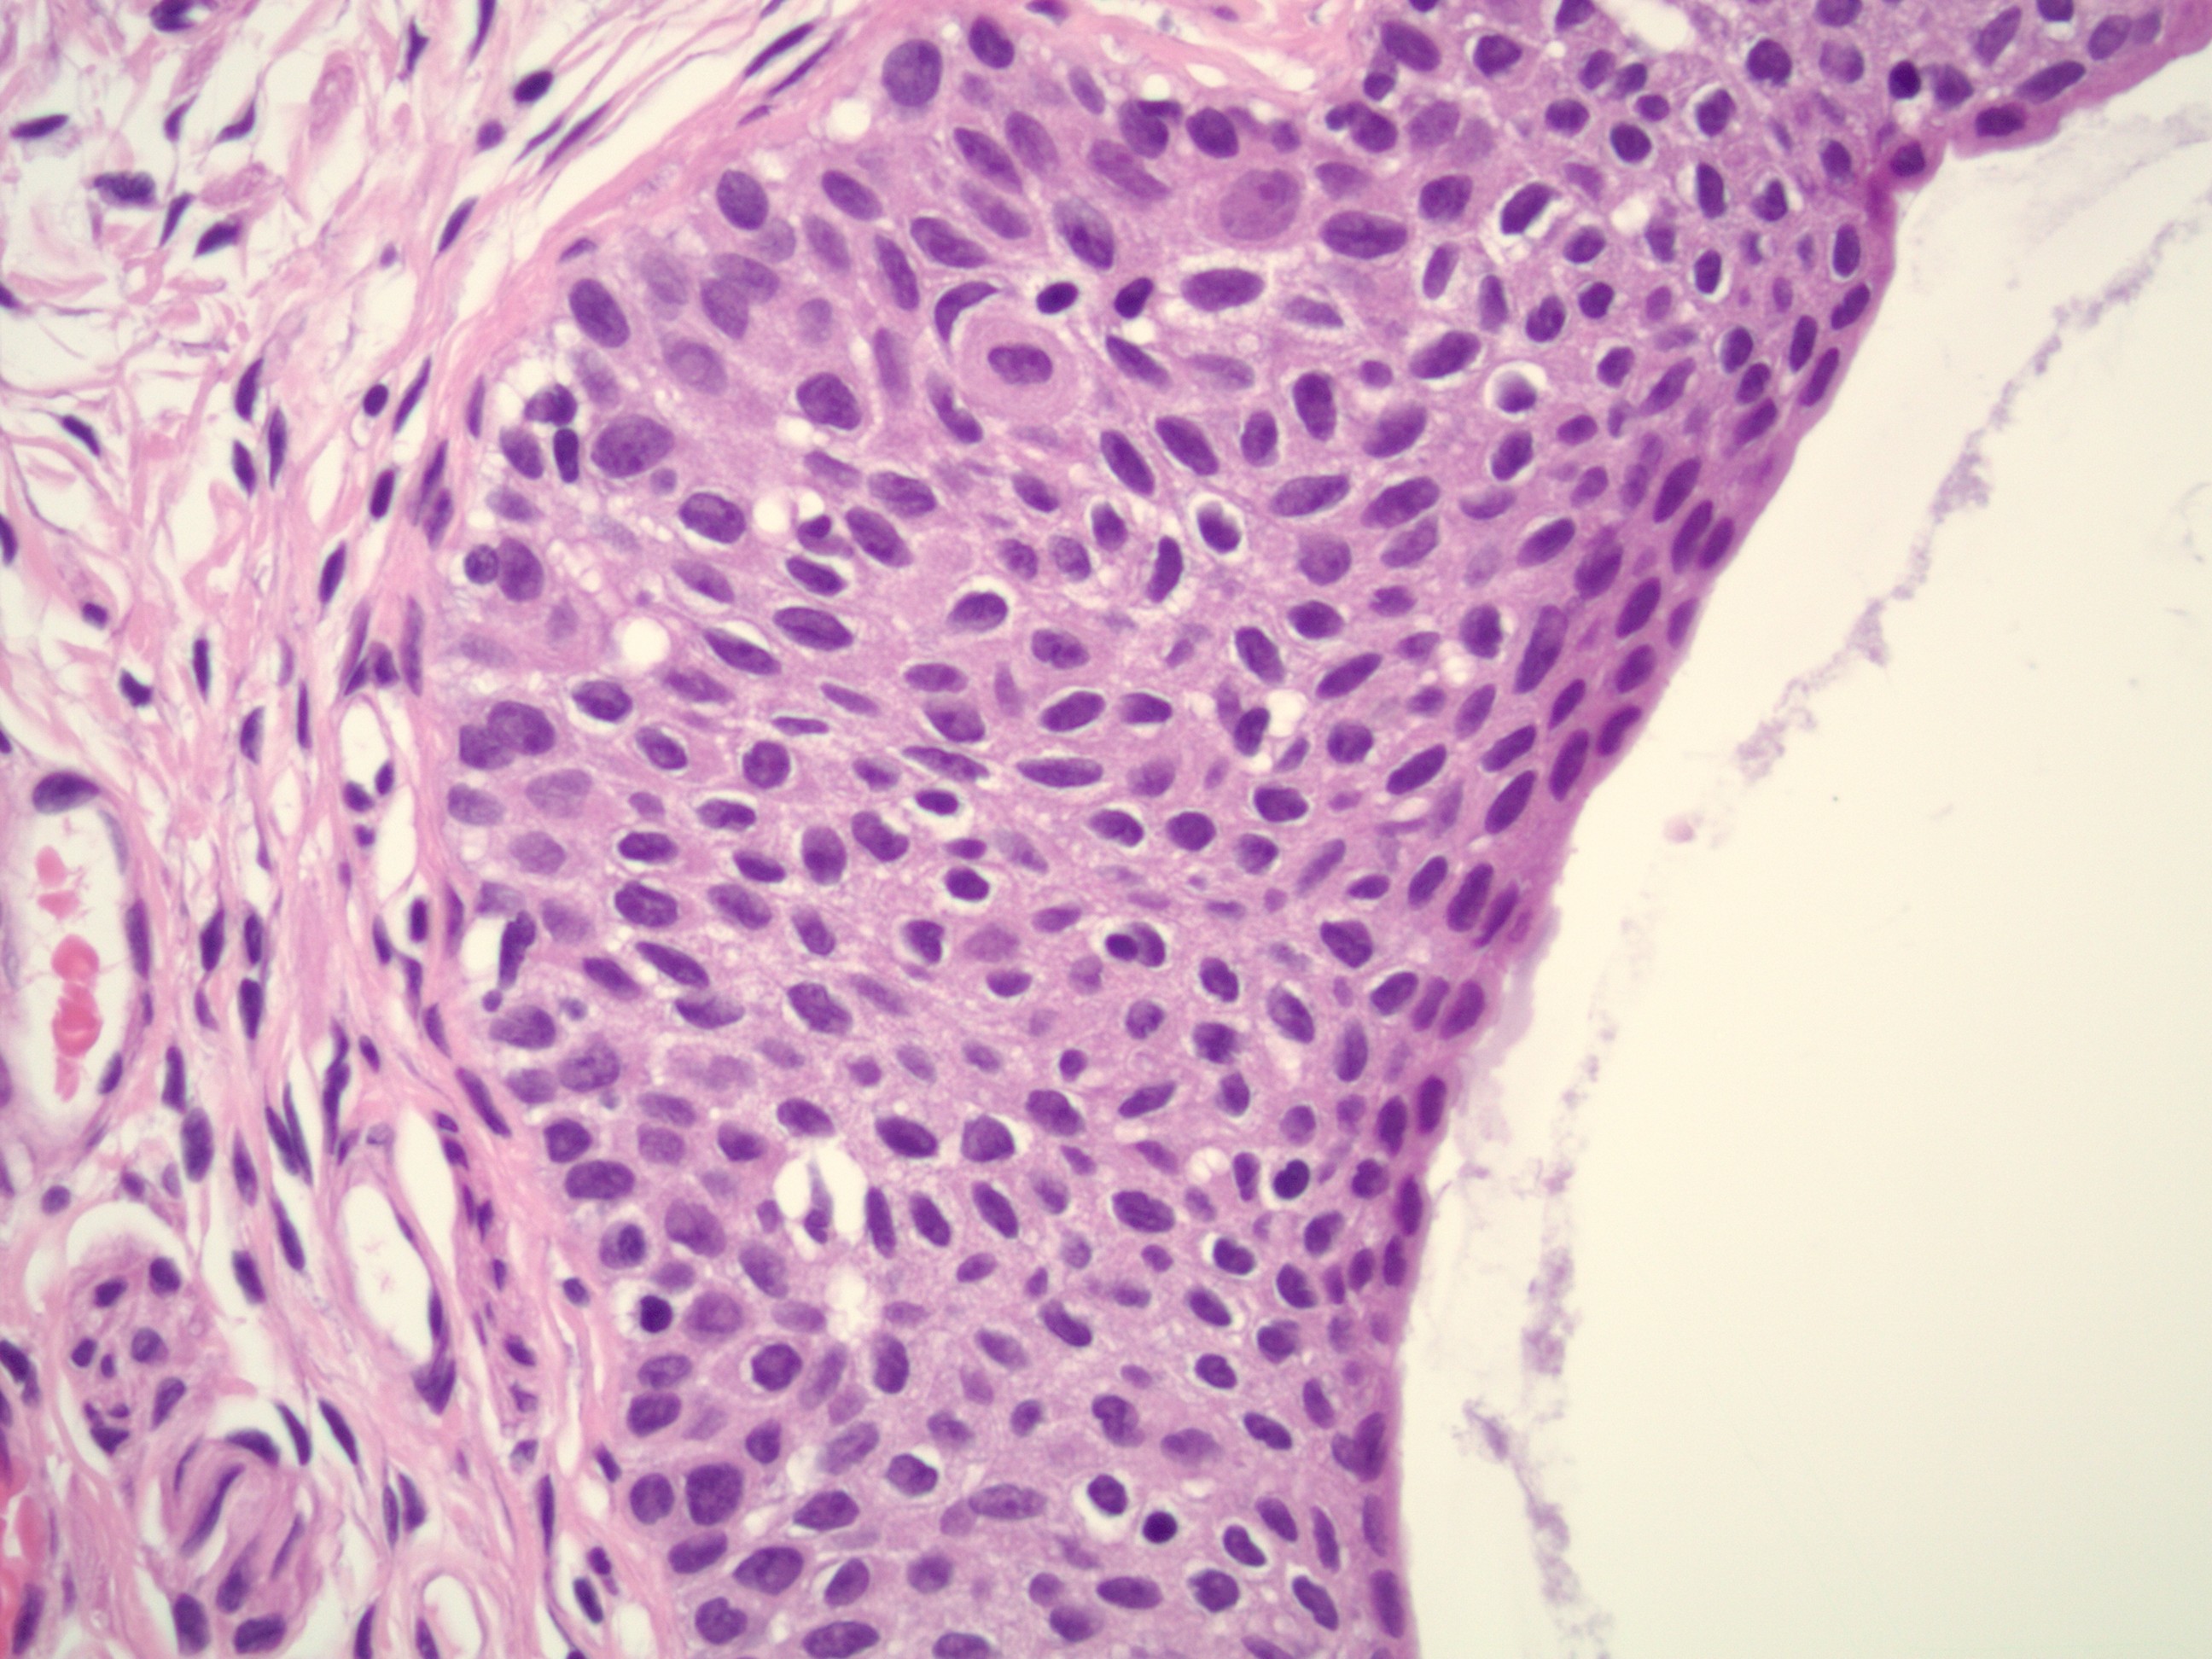 Walthard cell nests, incidental finding